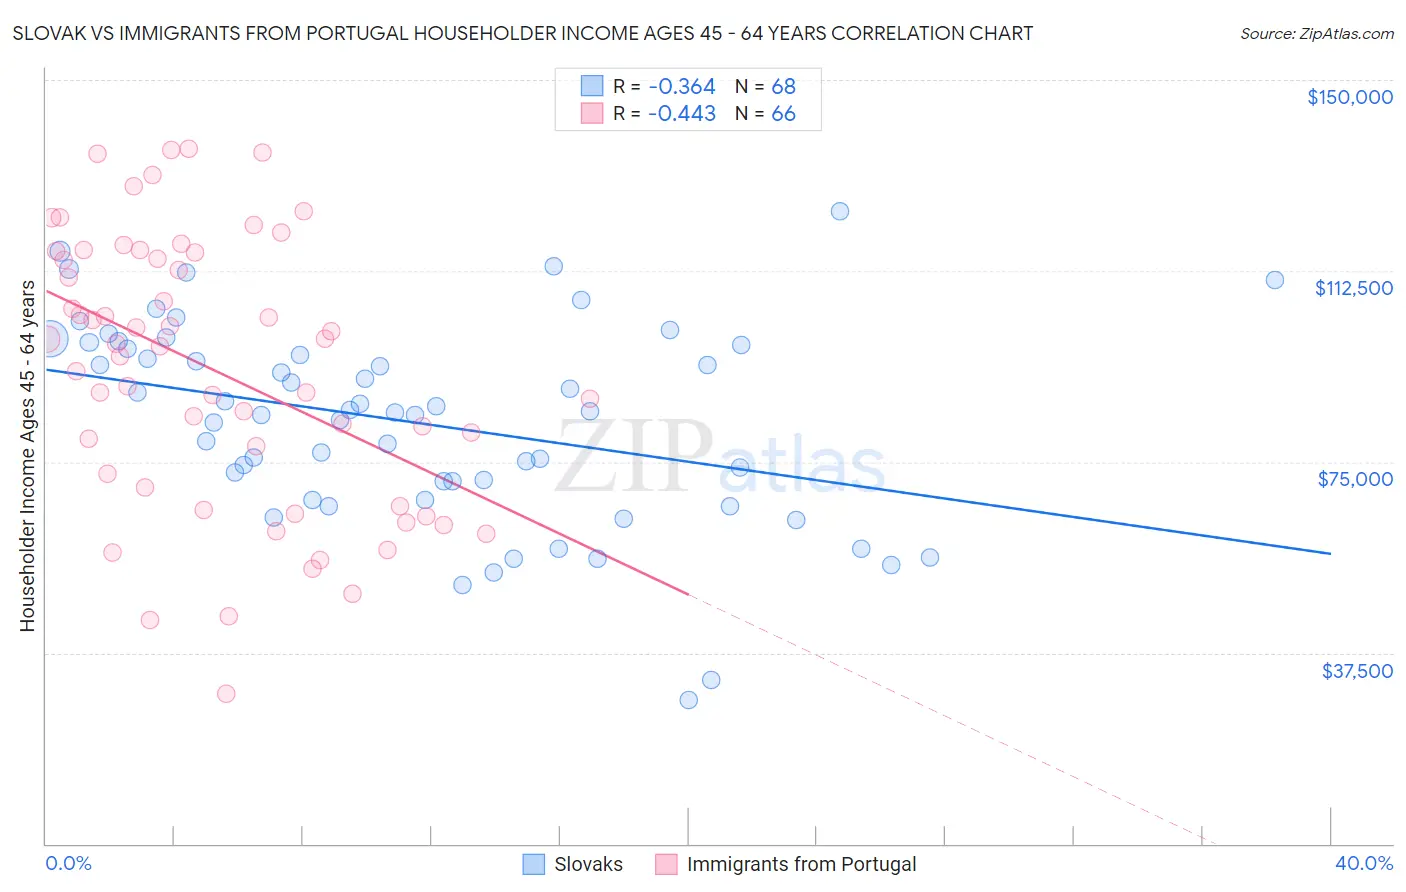 Slovak vs Immigrants from Portugal Householder Income Ages 45 - 64 years